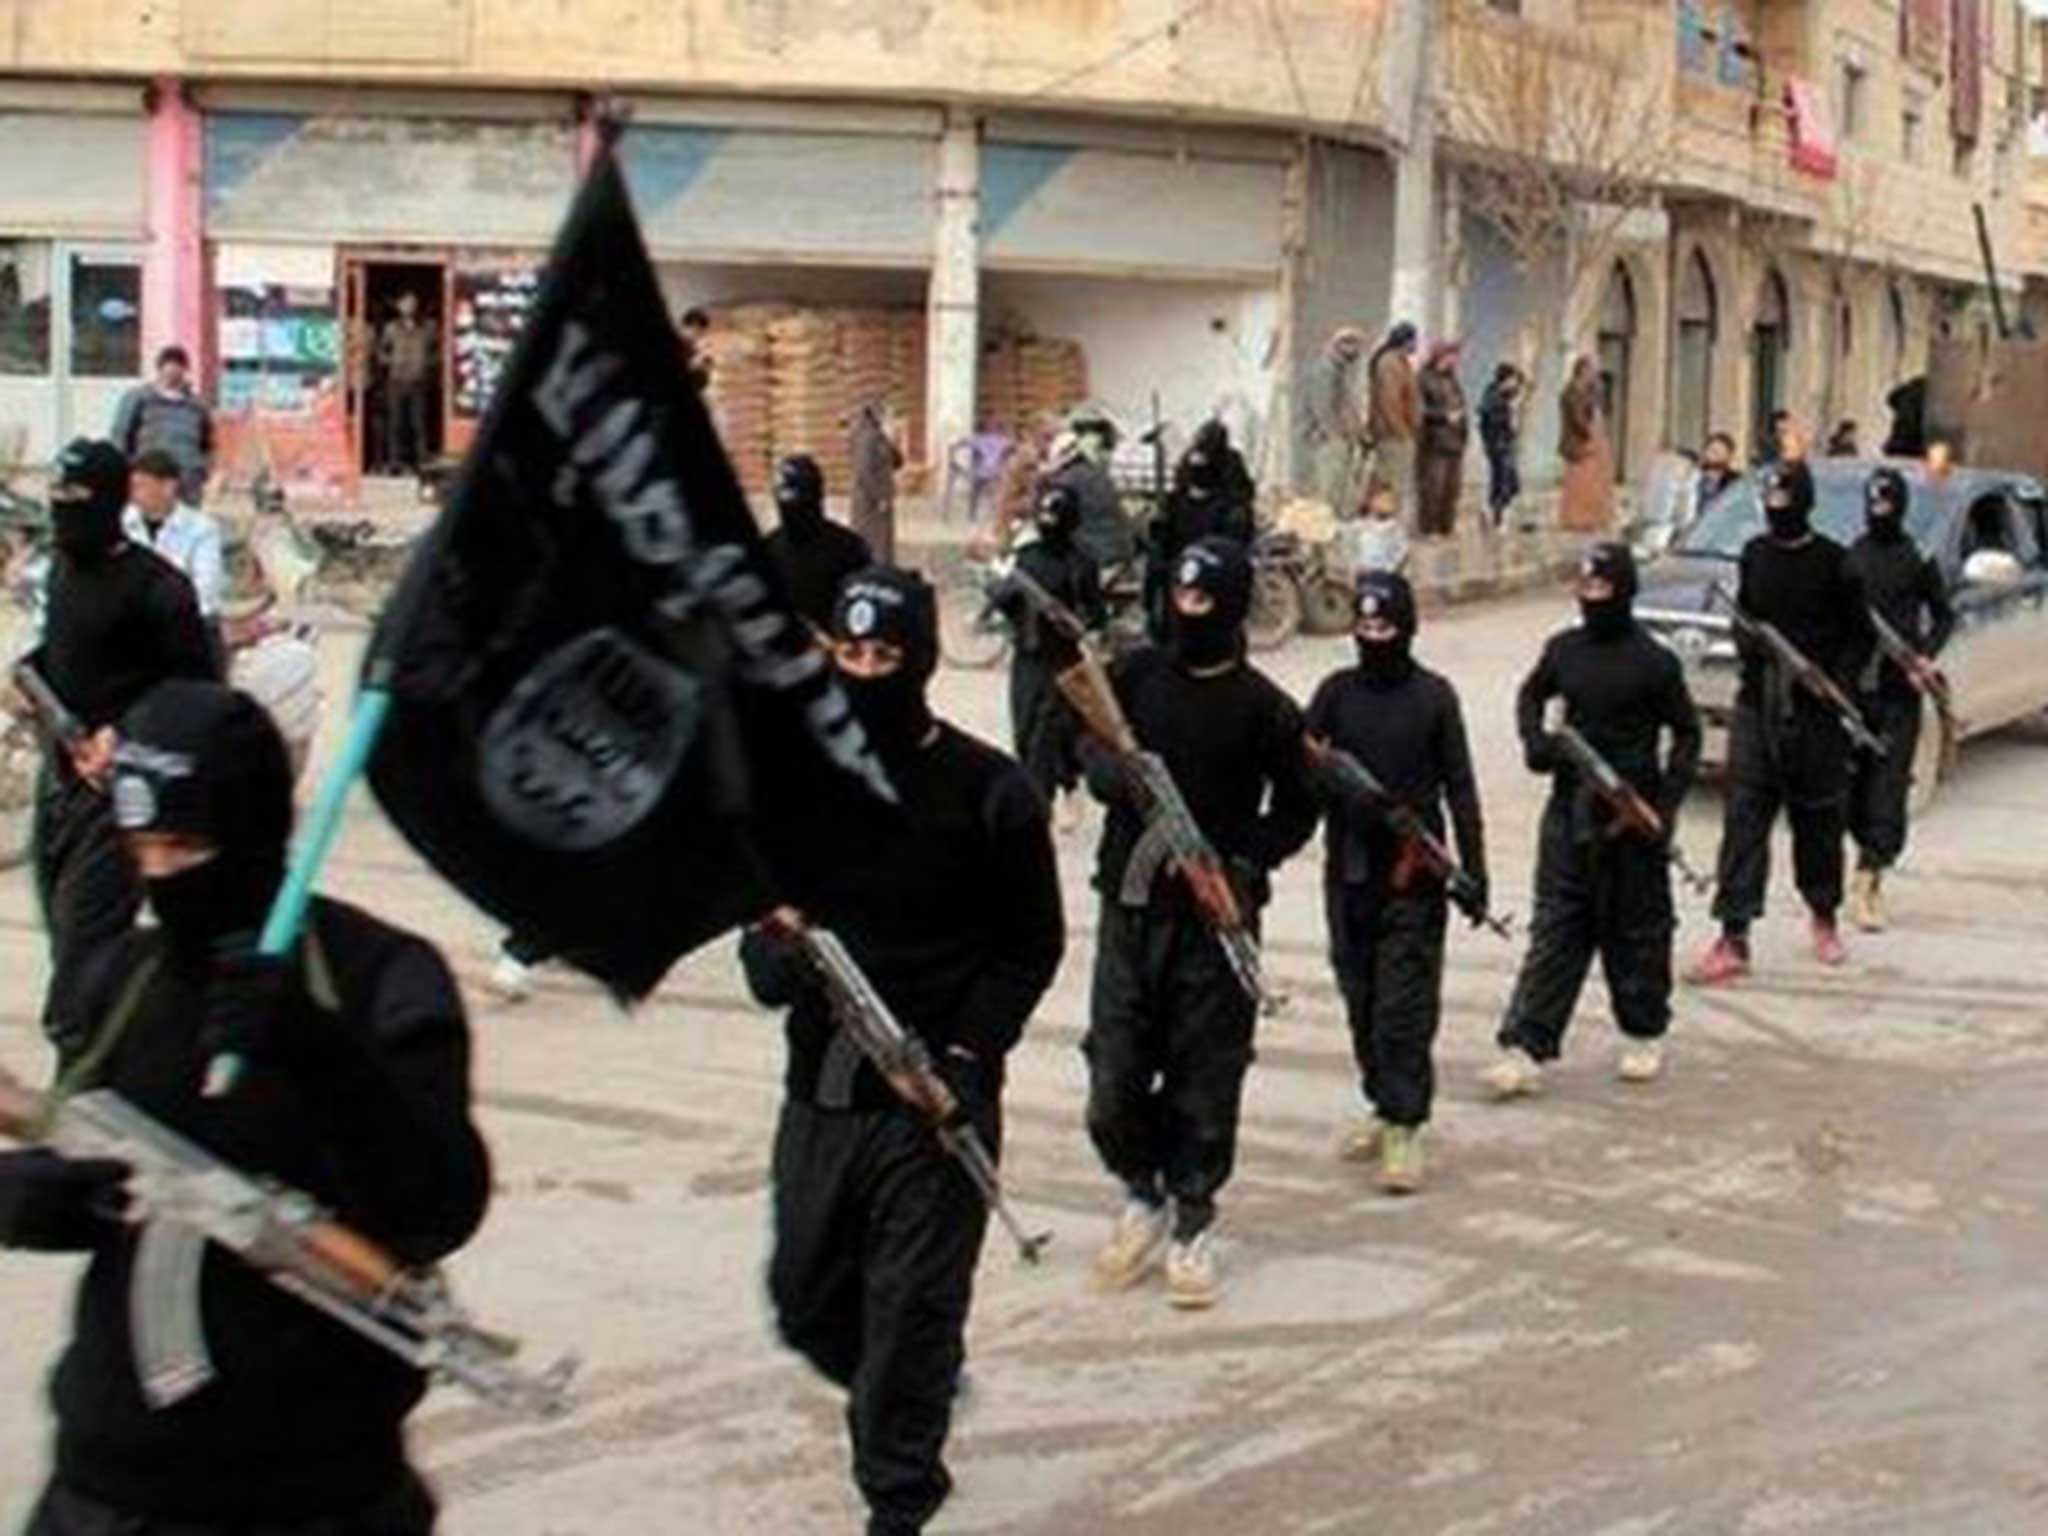 The Islamic militant group ISIS have recently made a name for themselves brutally beheading Western hostages